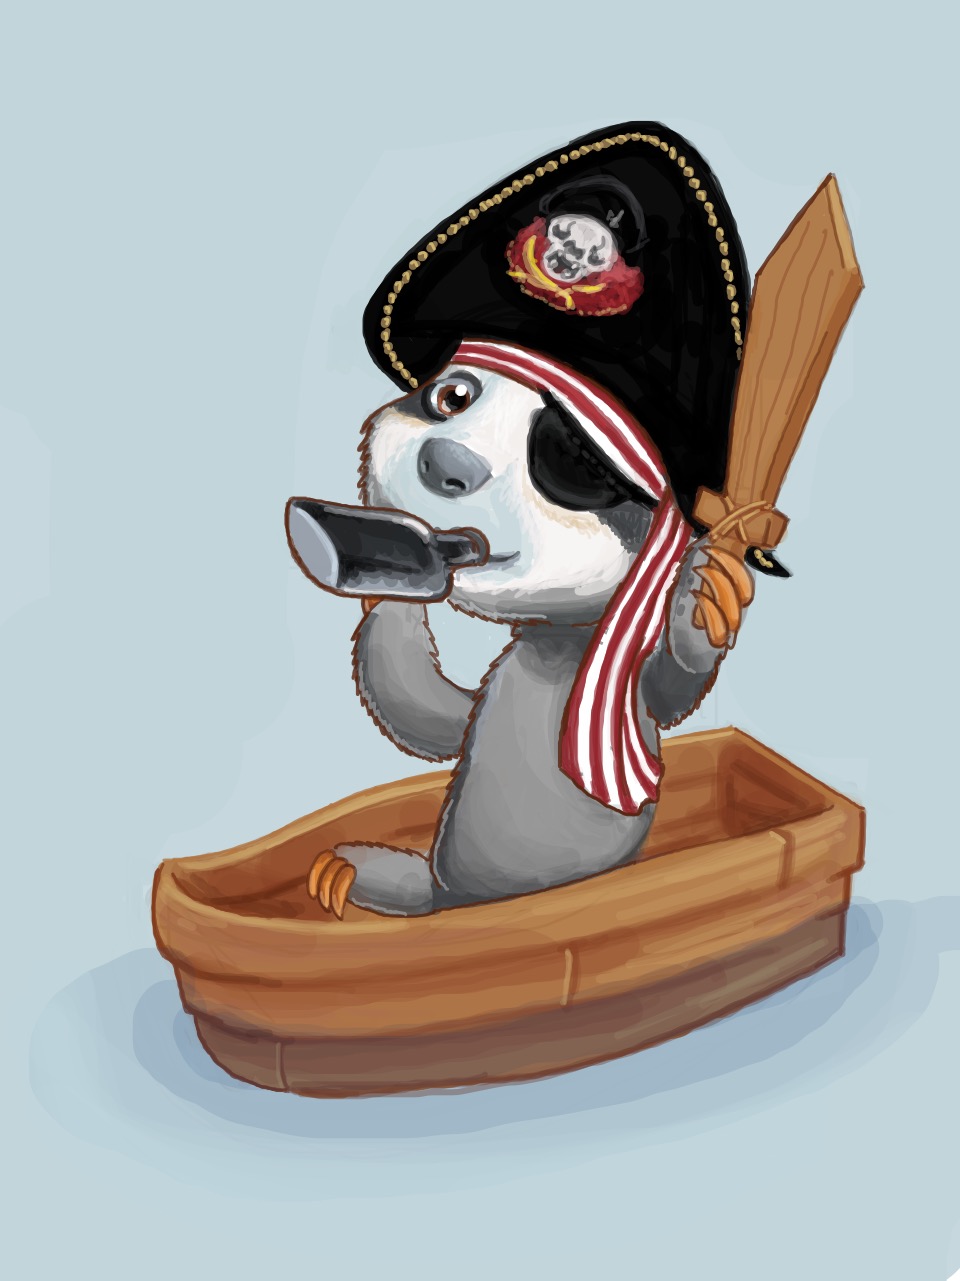 A chibi-style sloth sitting in a small boat, wearing an eyepatch and a pirate hat, and holding a wooden sword while sipping something from a metal flask.